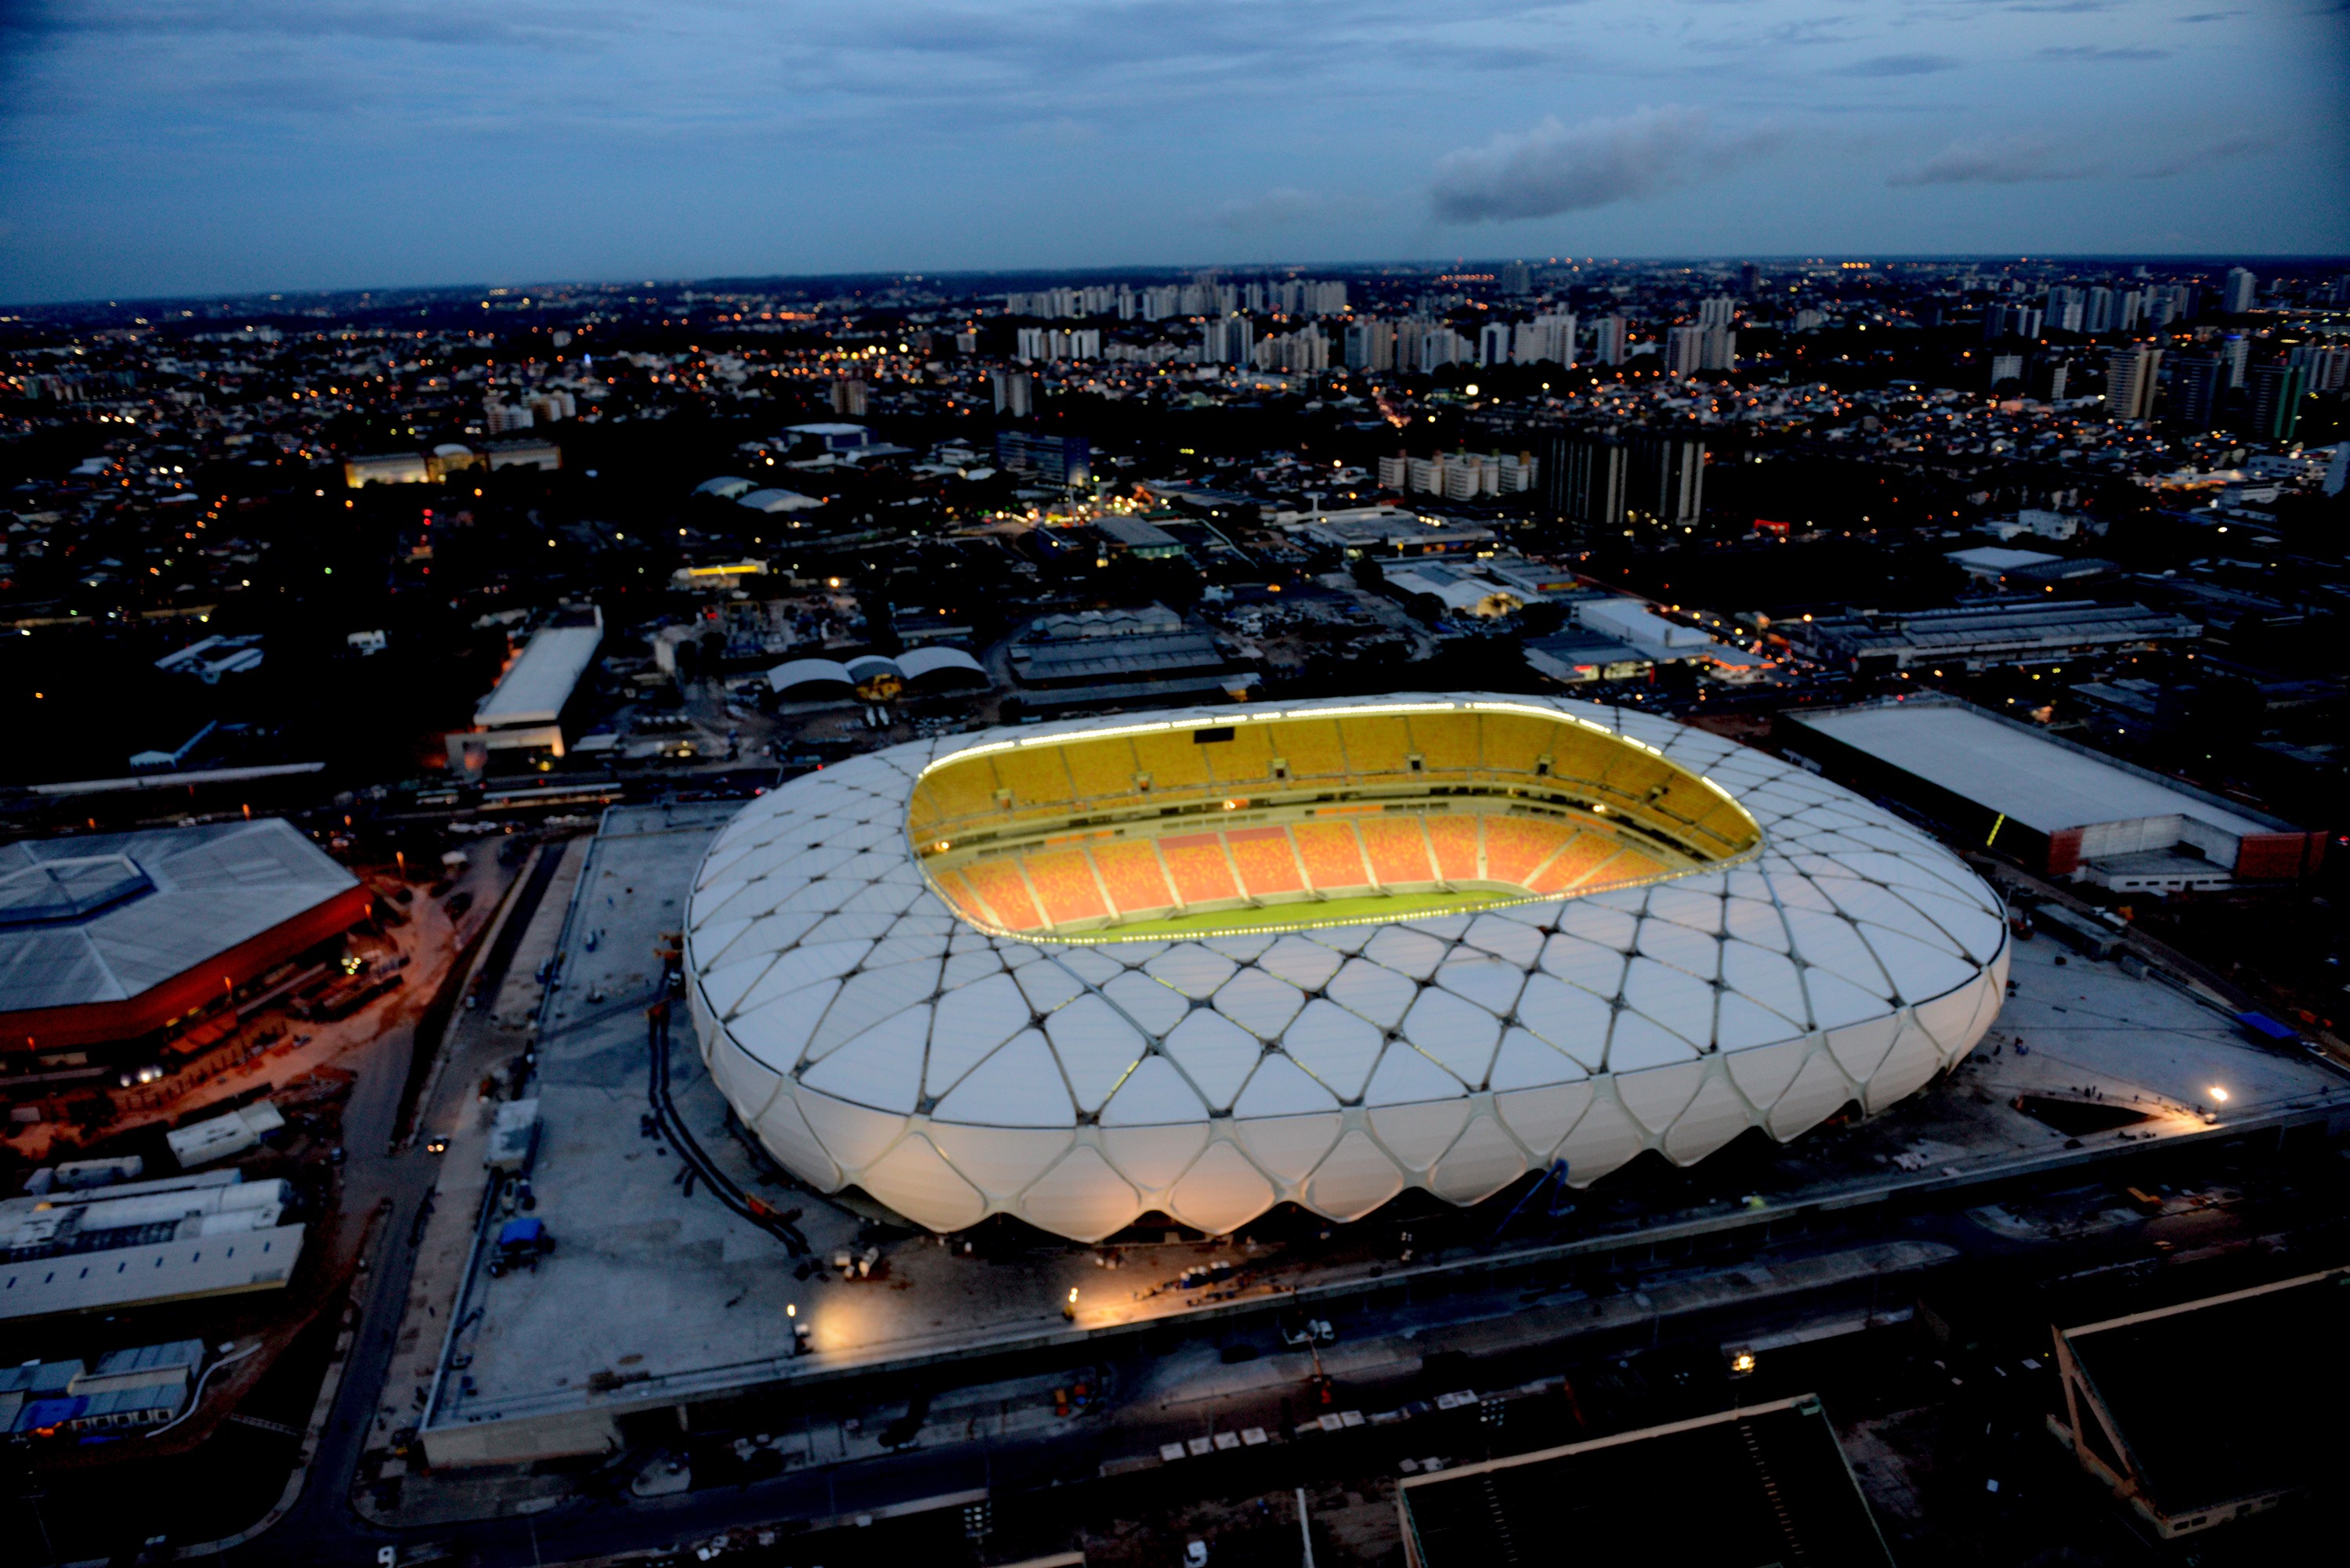 Poor safety infrastructure has led to six deaths while constructing the Brazil World Cup Stadiums